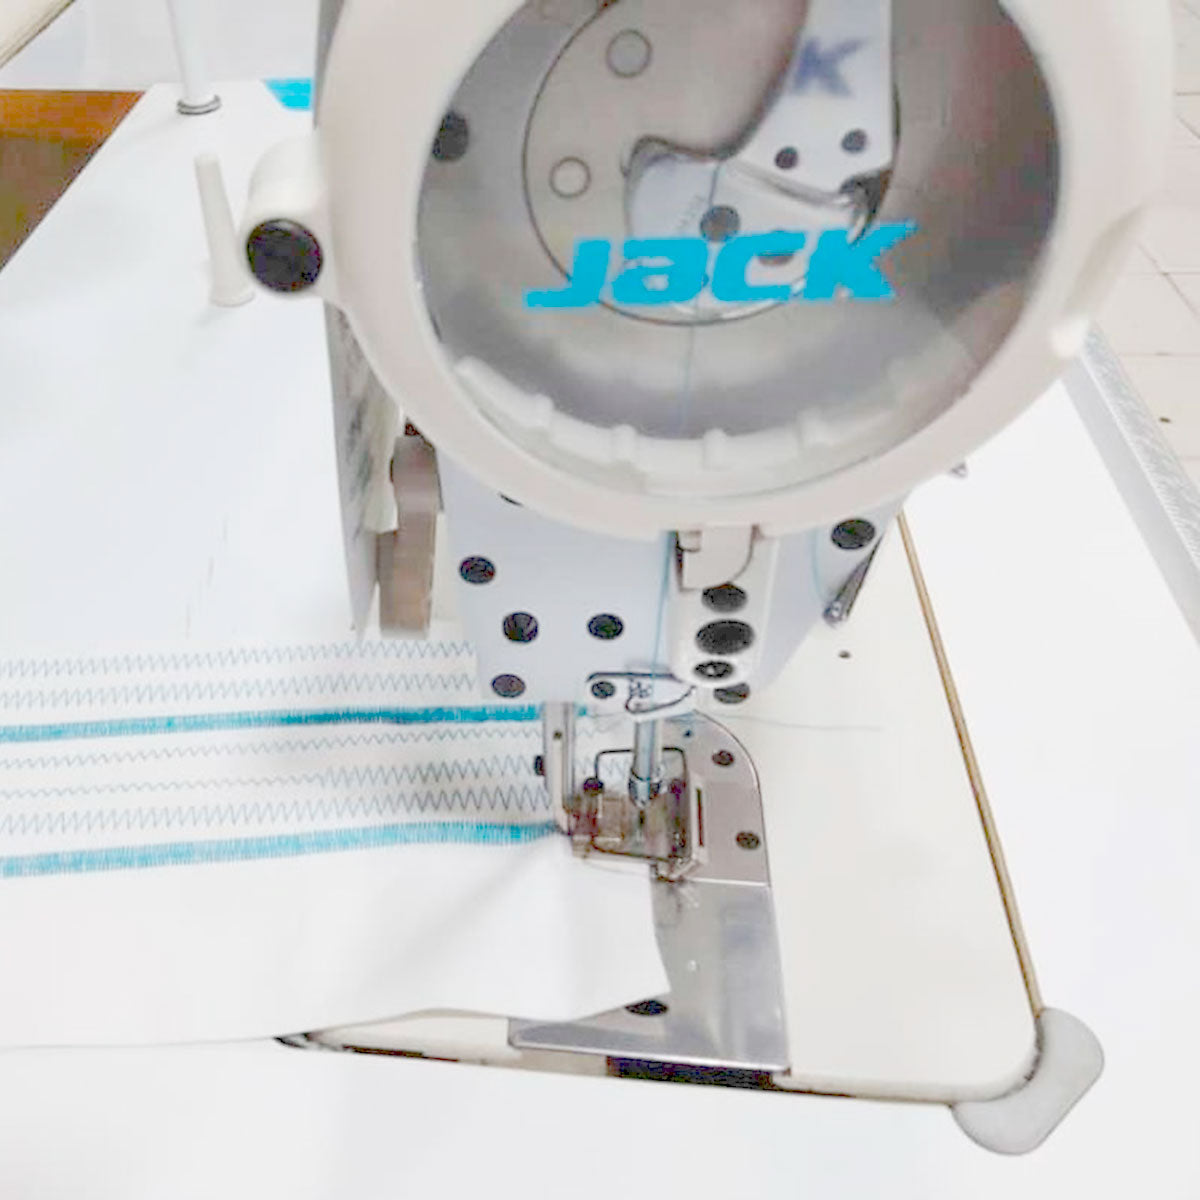 JACK JK-2284B-4E Single Needle Drop Feed 3 Step Zig-Zag Automatic Sewing Machine Assembled with Table and Stand Included